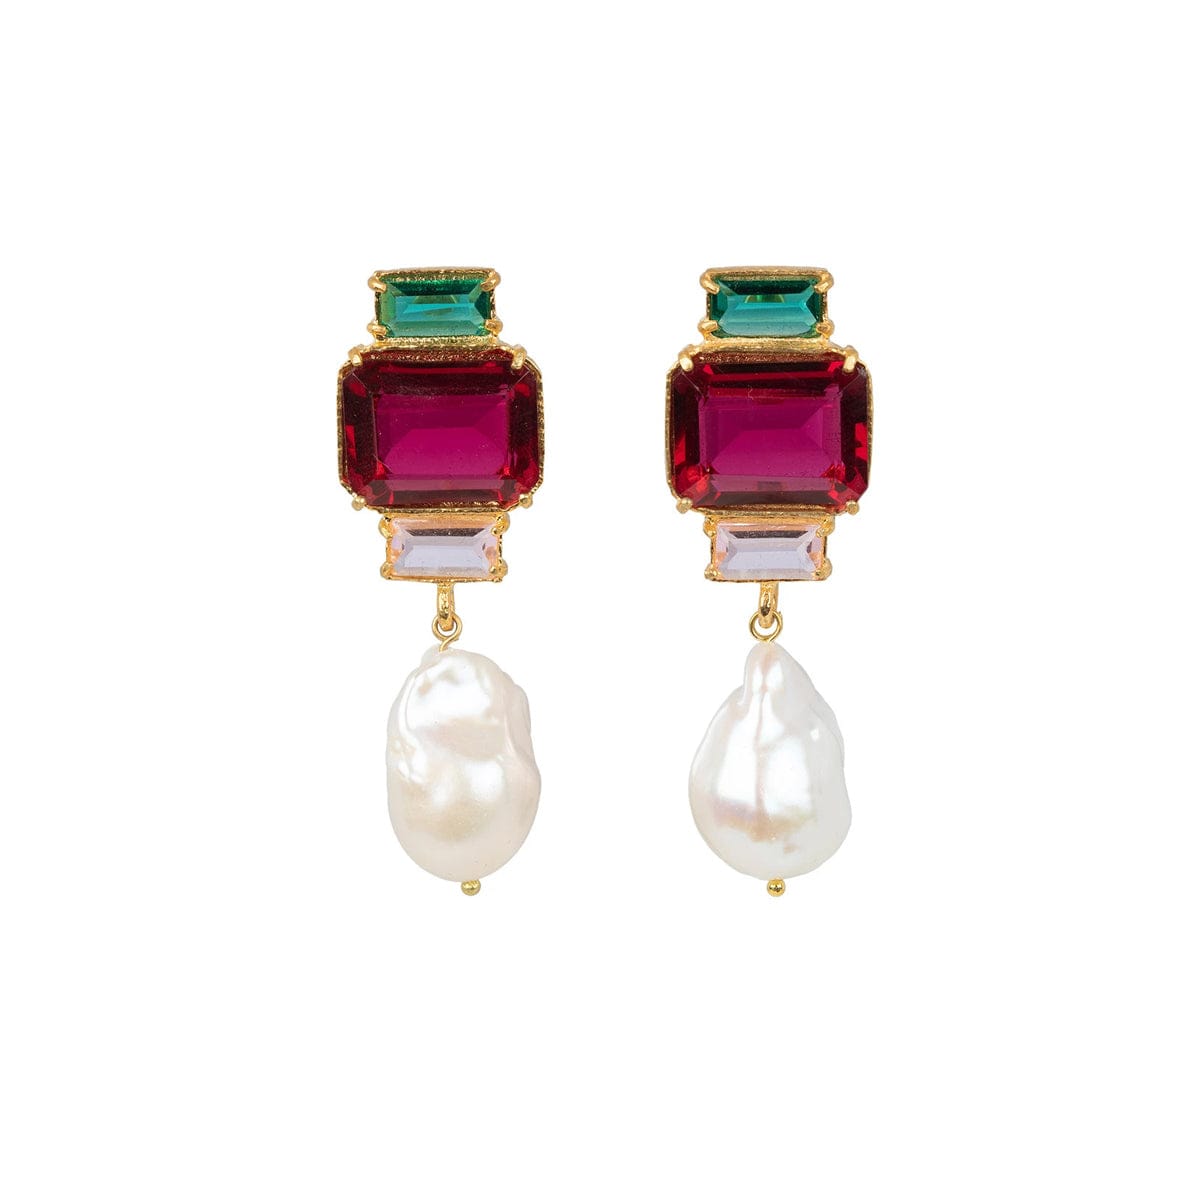 Fuschia & Green Crystals with a Pearl Drop. Gold tone.